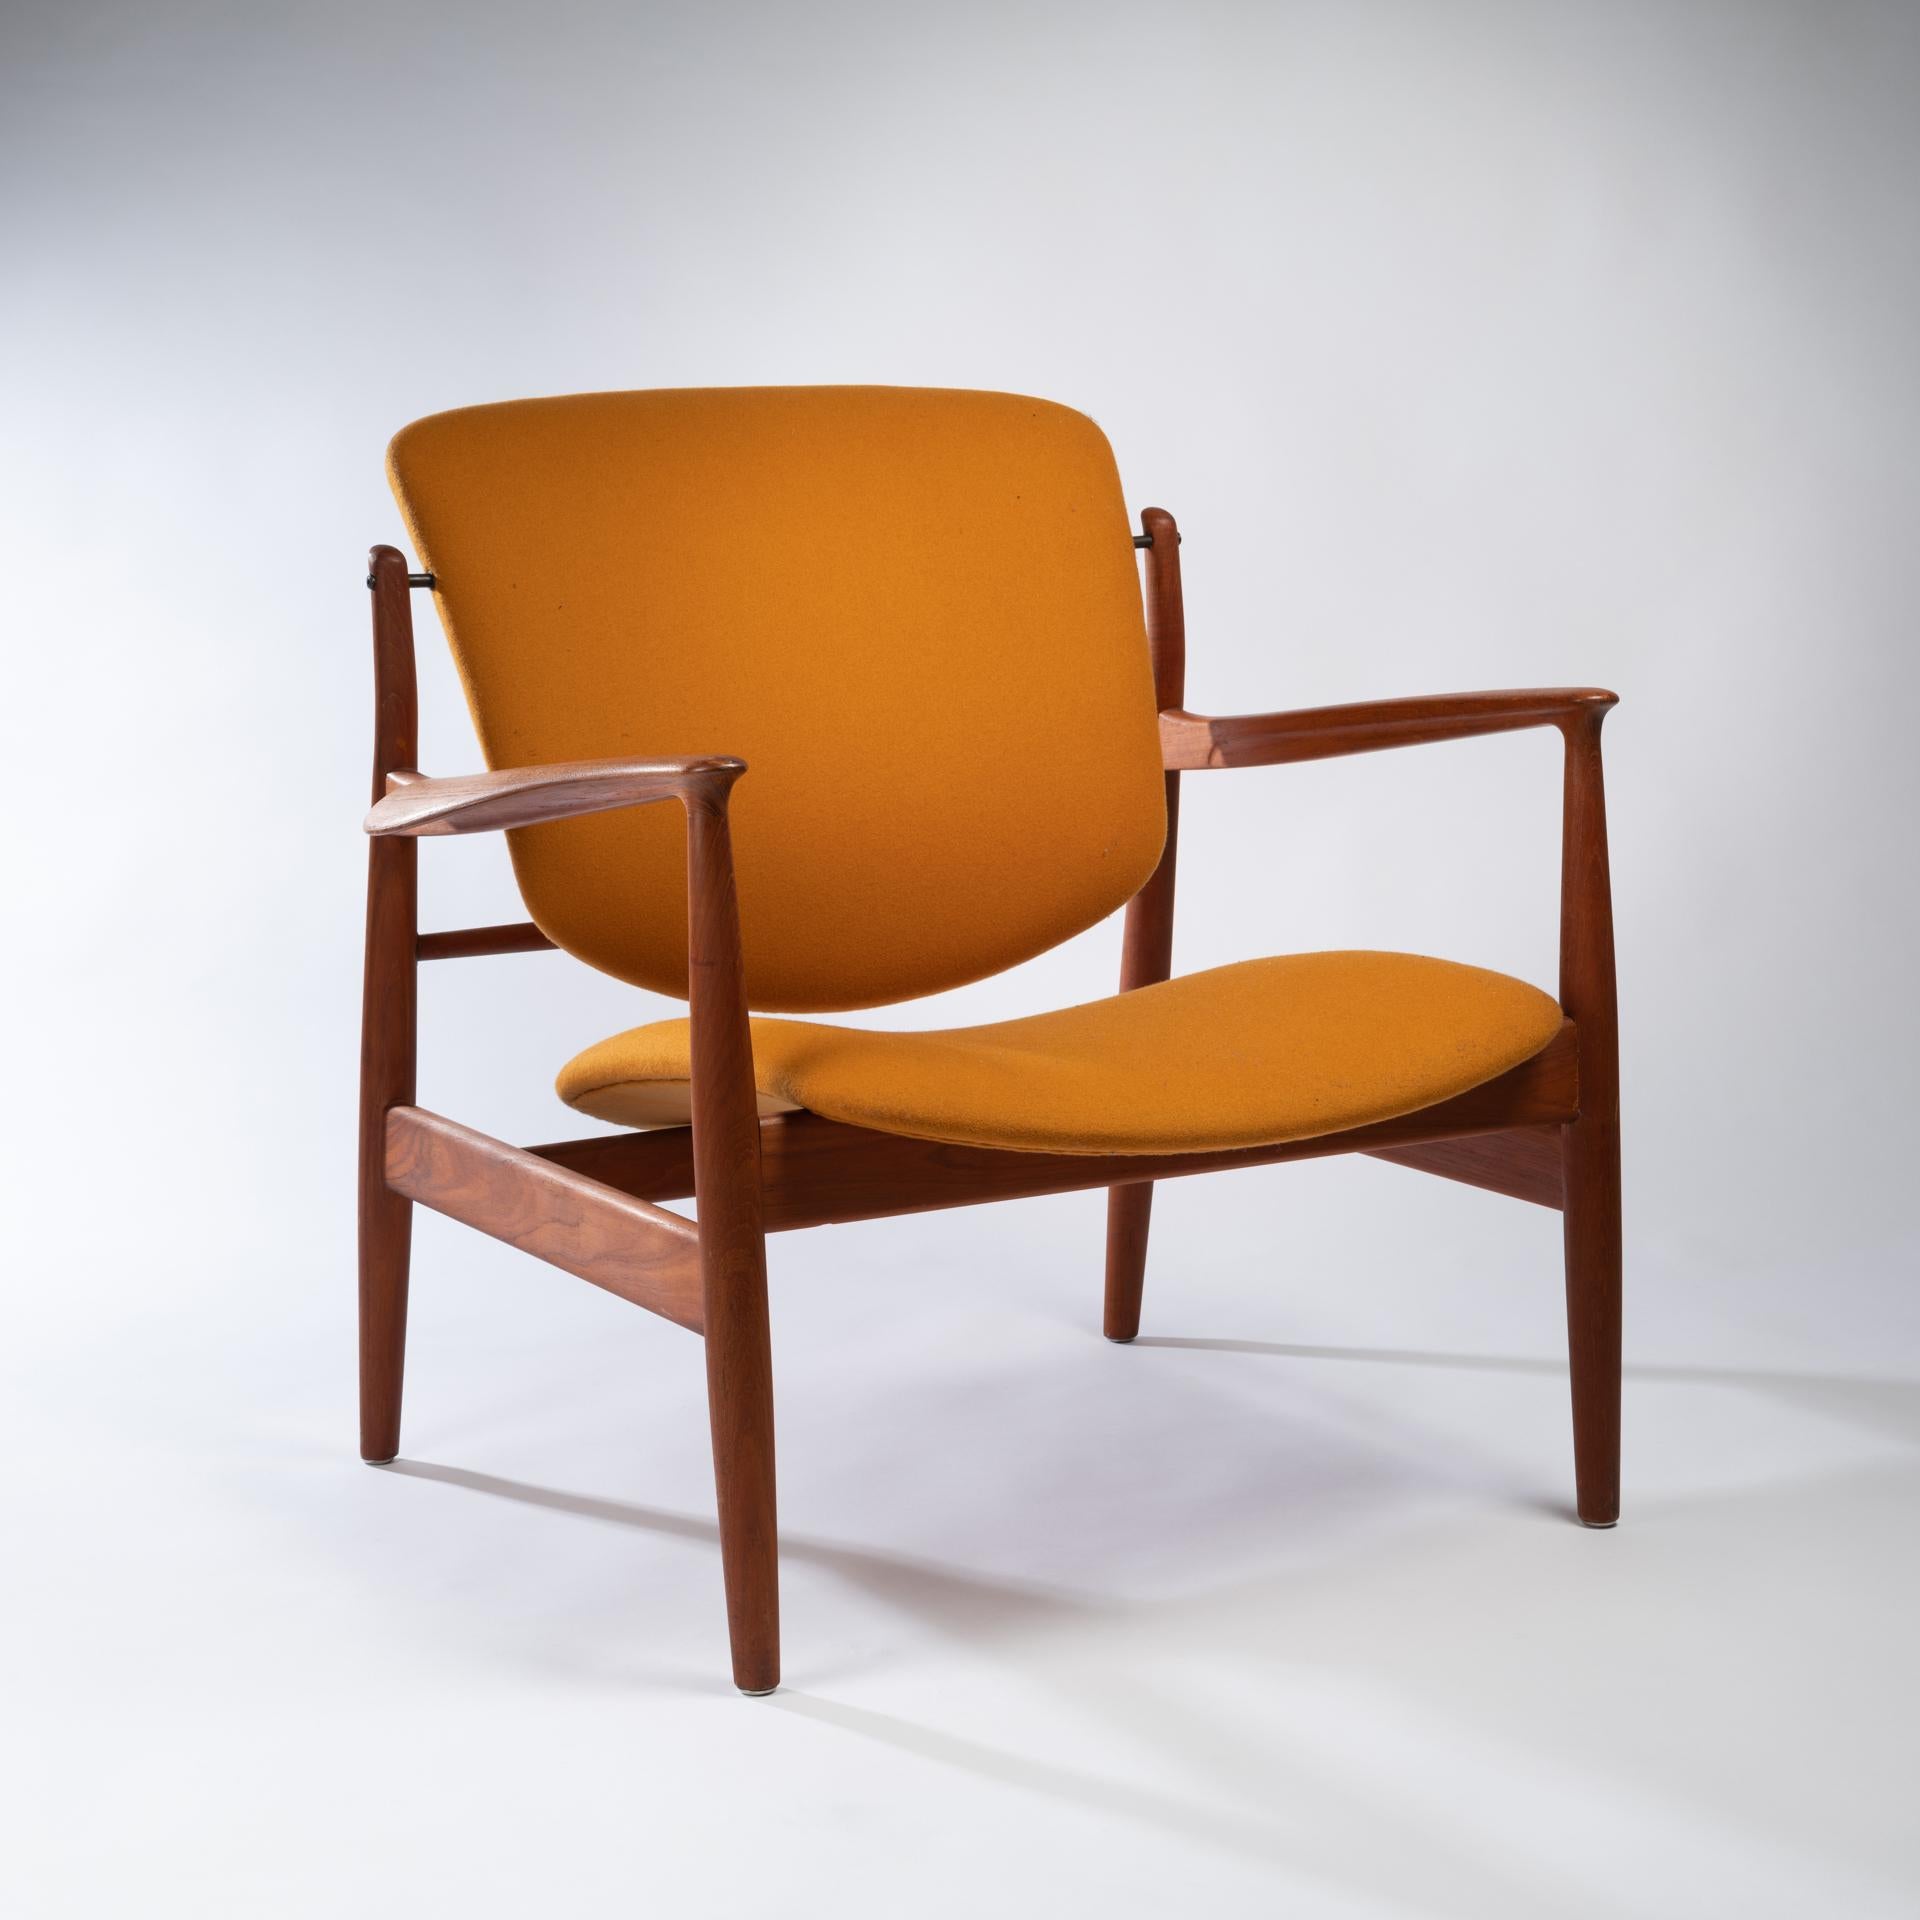 The Iconic FD-136 teak lounge chairs were designed by Finn Juhl for France and Sons in 1950. Special attention was given to the finely carved arms. The Lounge Chair is in very good condition, with an attractive patina on the sturdy frame. The